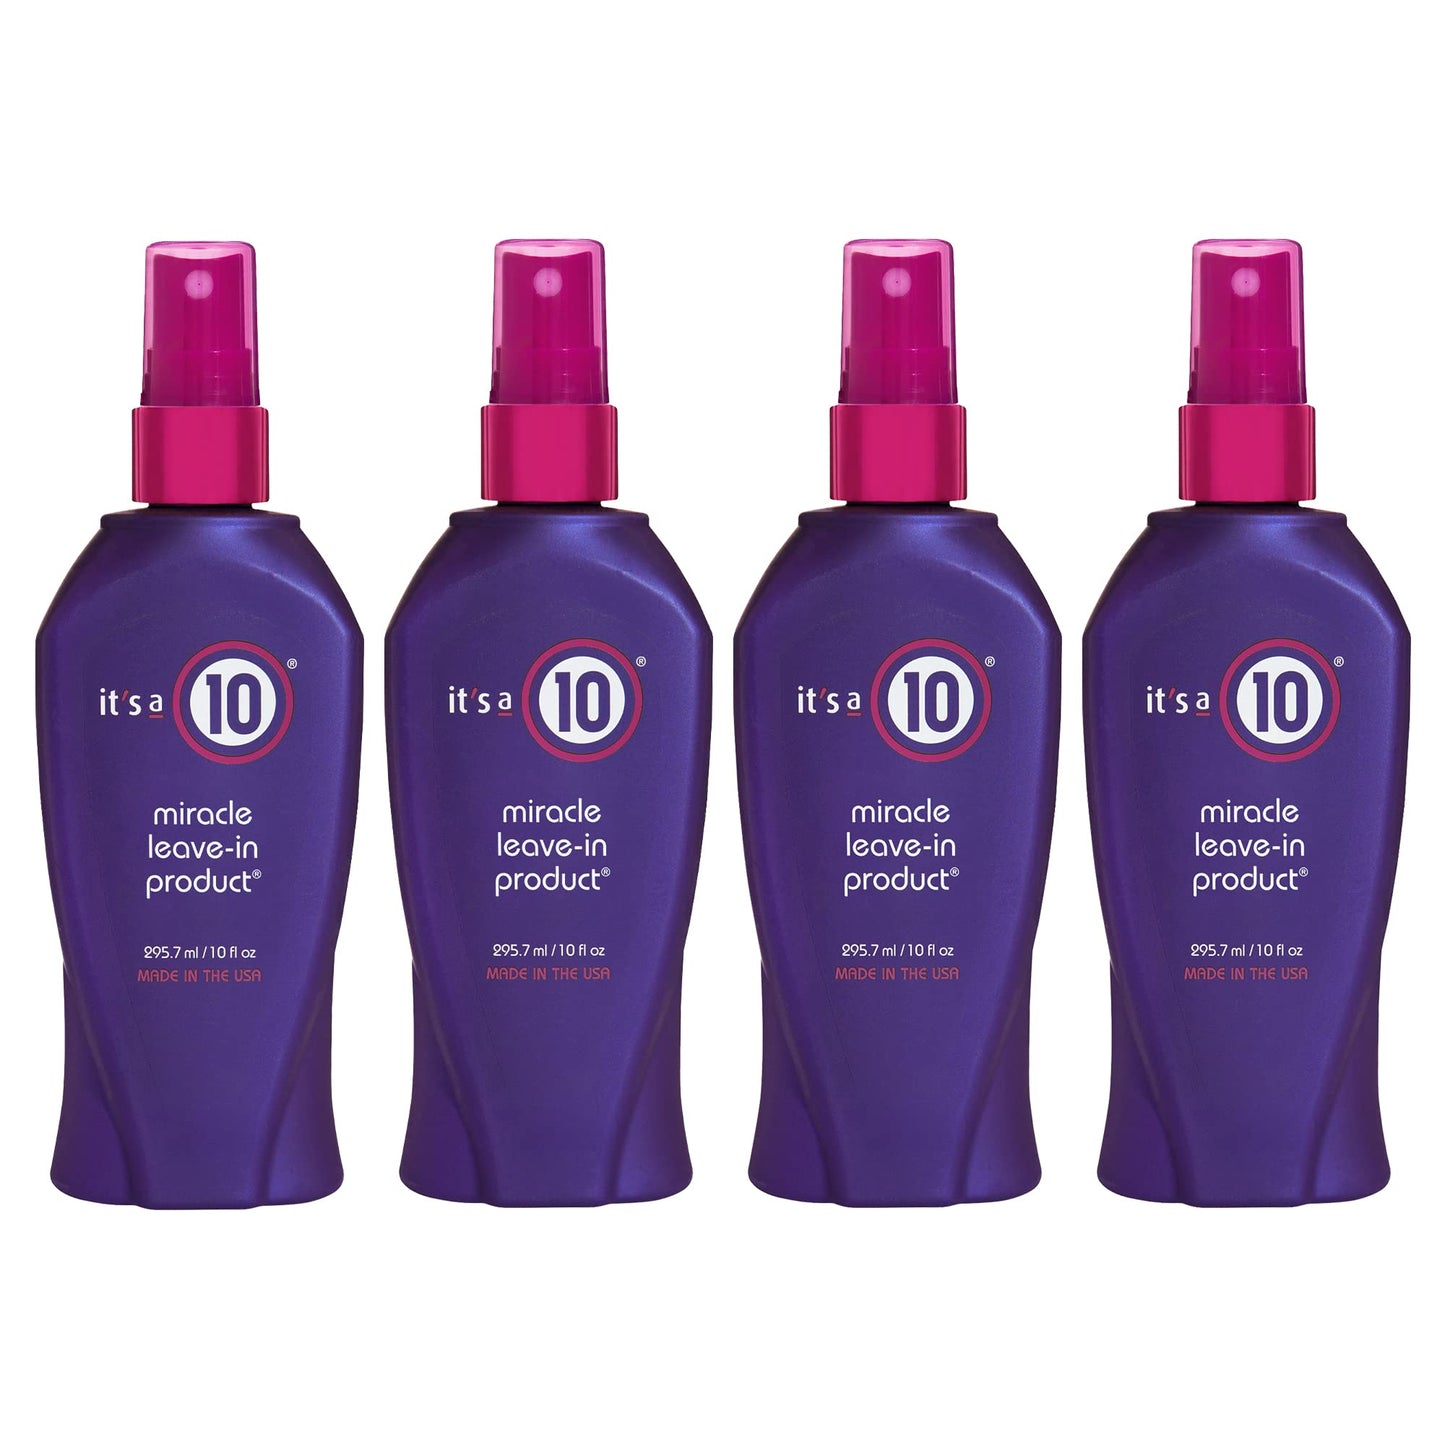 It's A 10 Miracle Leave-In Haircare - 4 oz (112505)